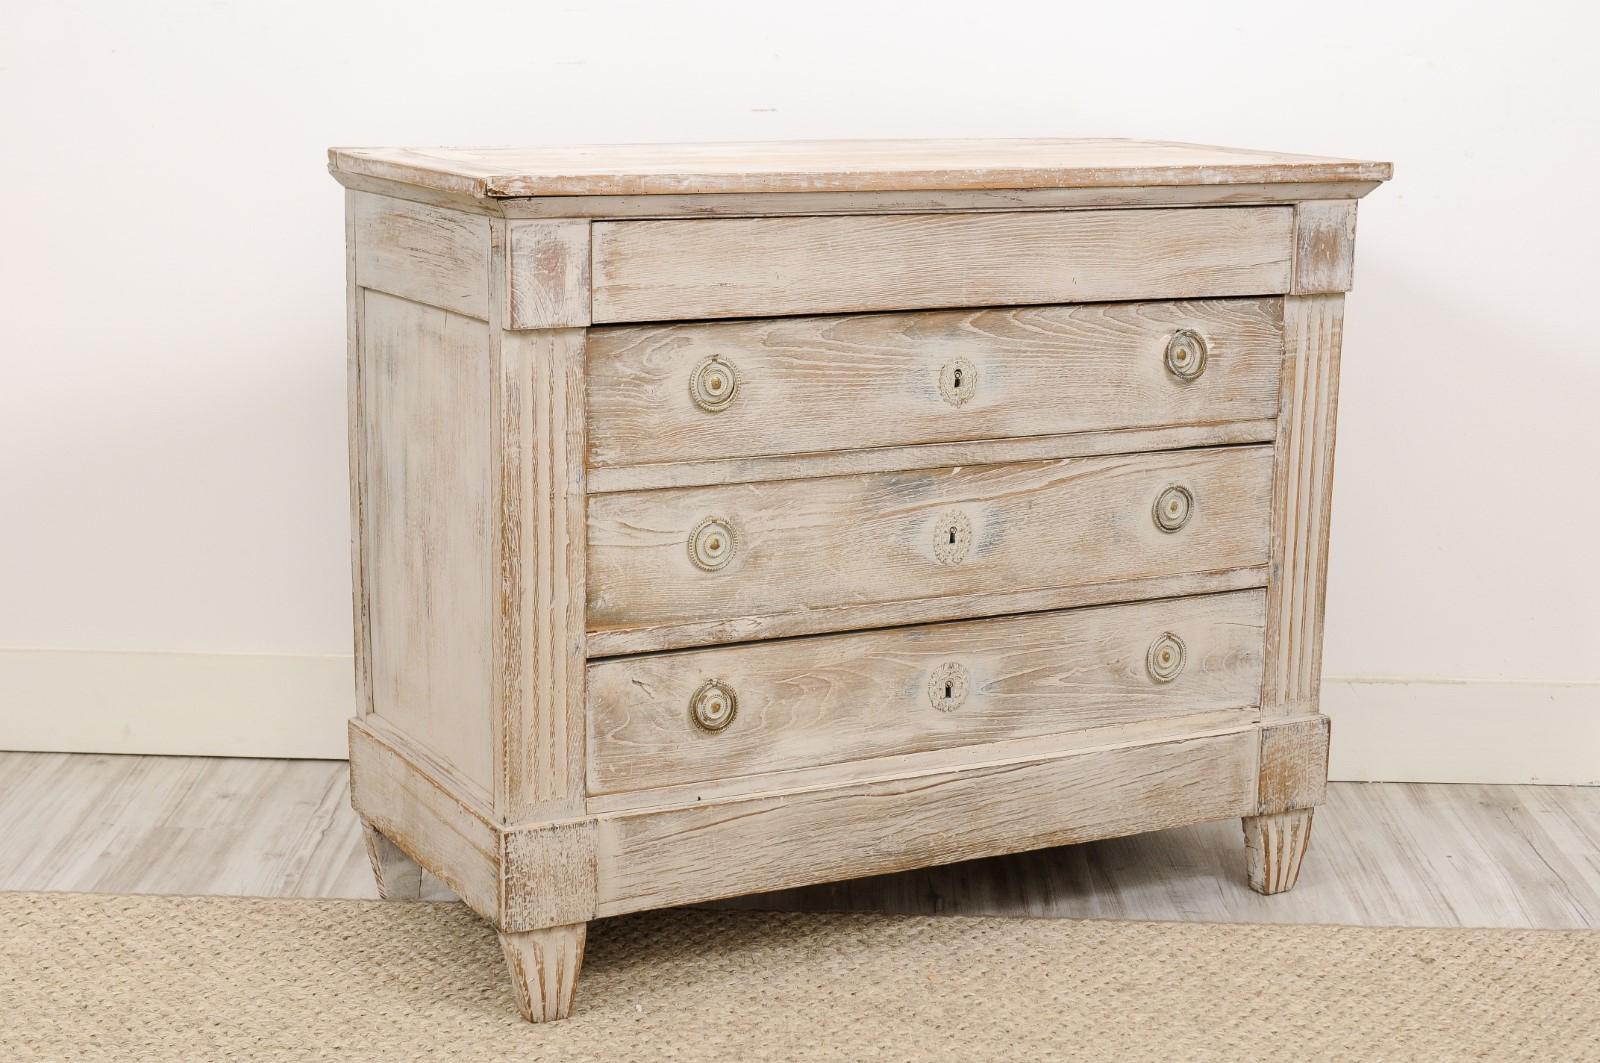 A northern French Louis XVI style blanched commode from the late 19th century with four drawers, fluted side posts and tapered feet. We love the Louis XVI details, like the fluted feet, the pretty patina and the secret drawer on top. With its clean